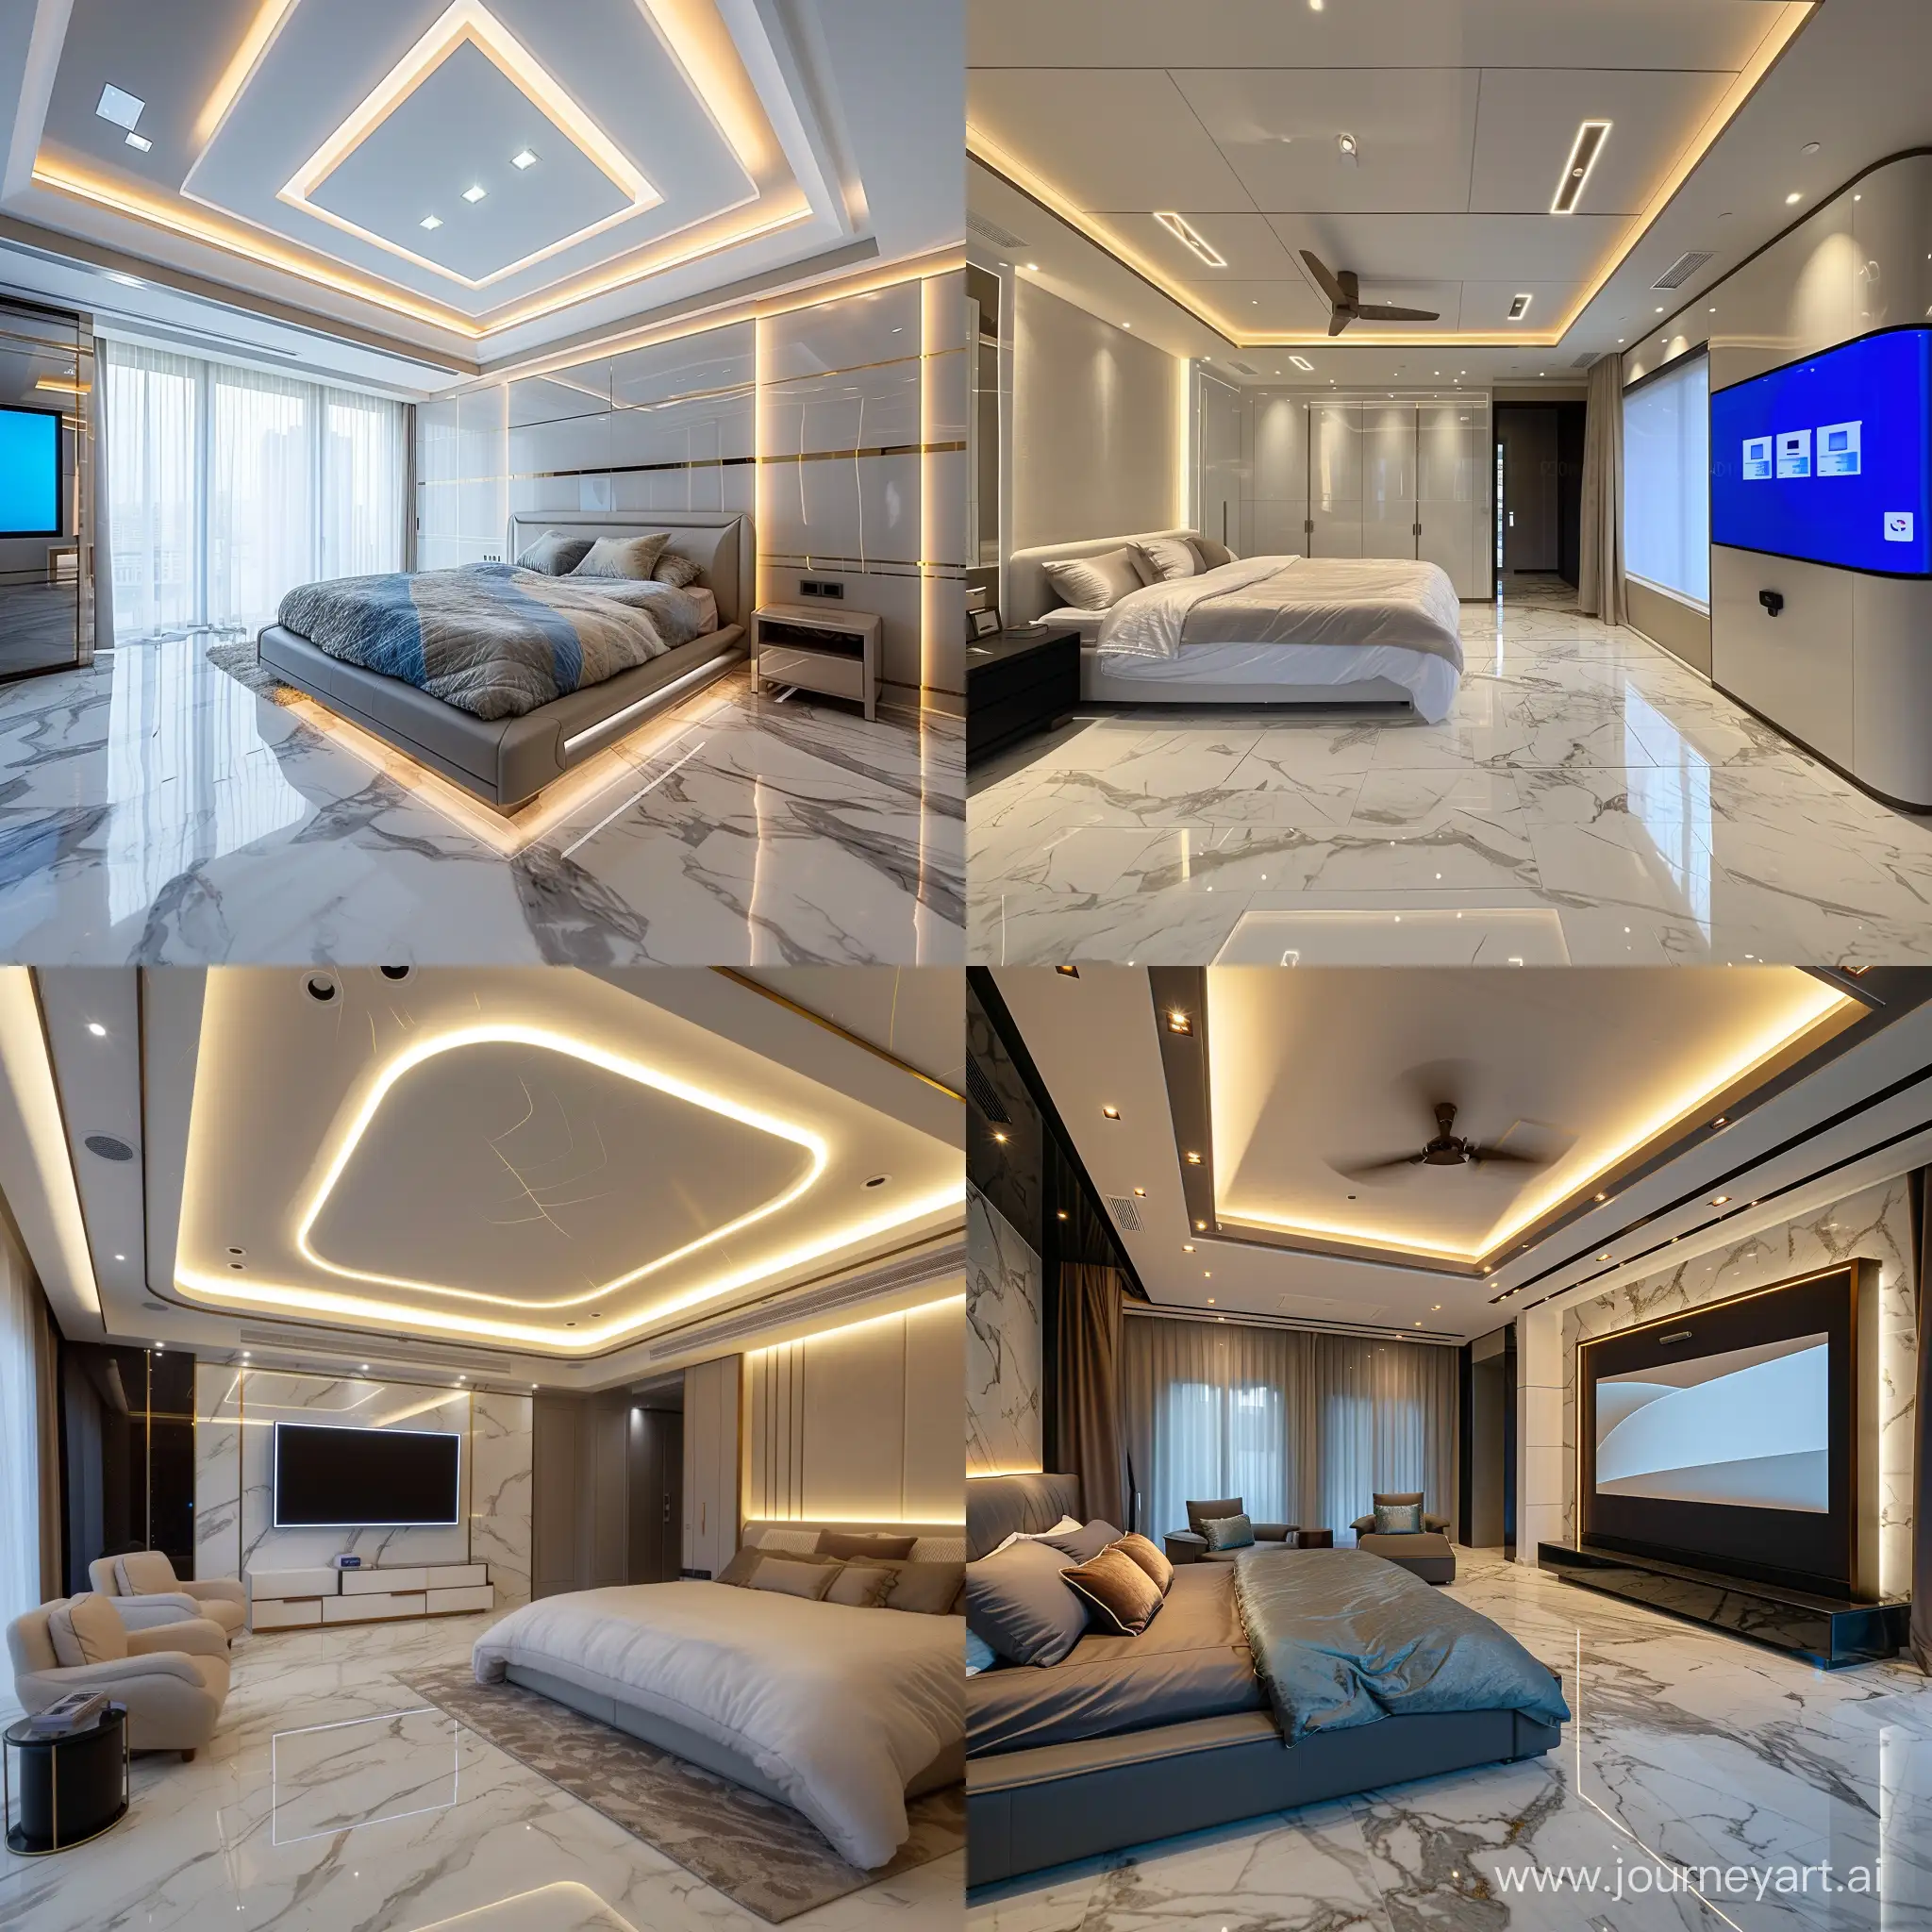 Luxurious-Master-Bedroom-Interior-Design-with-Marble-Flooring-and-Smart-Screen